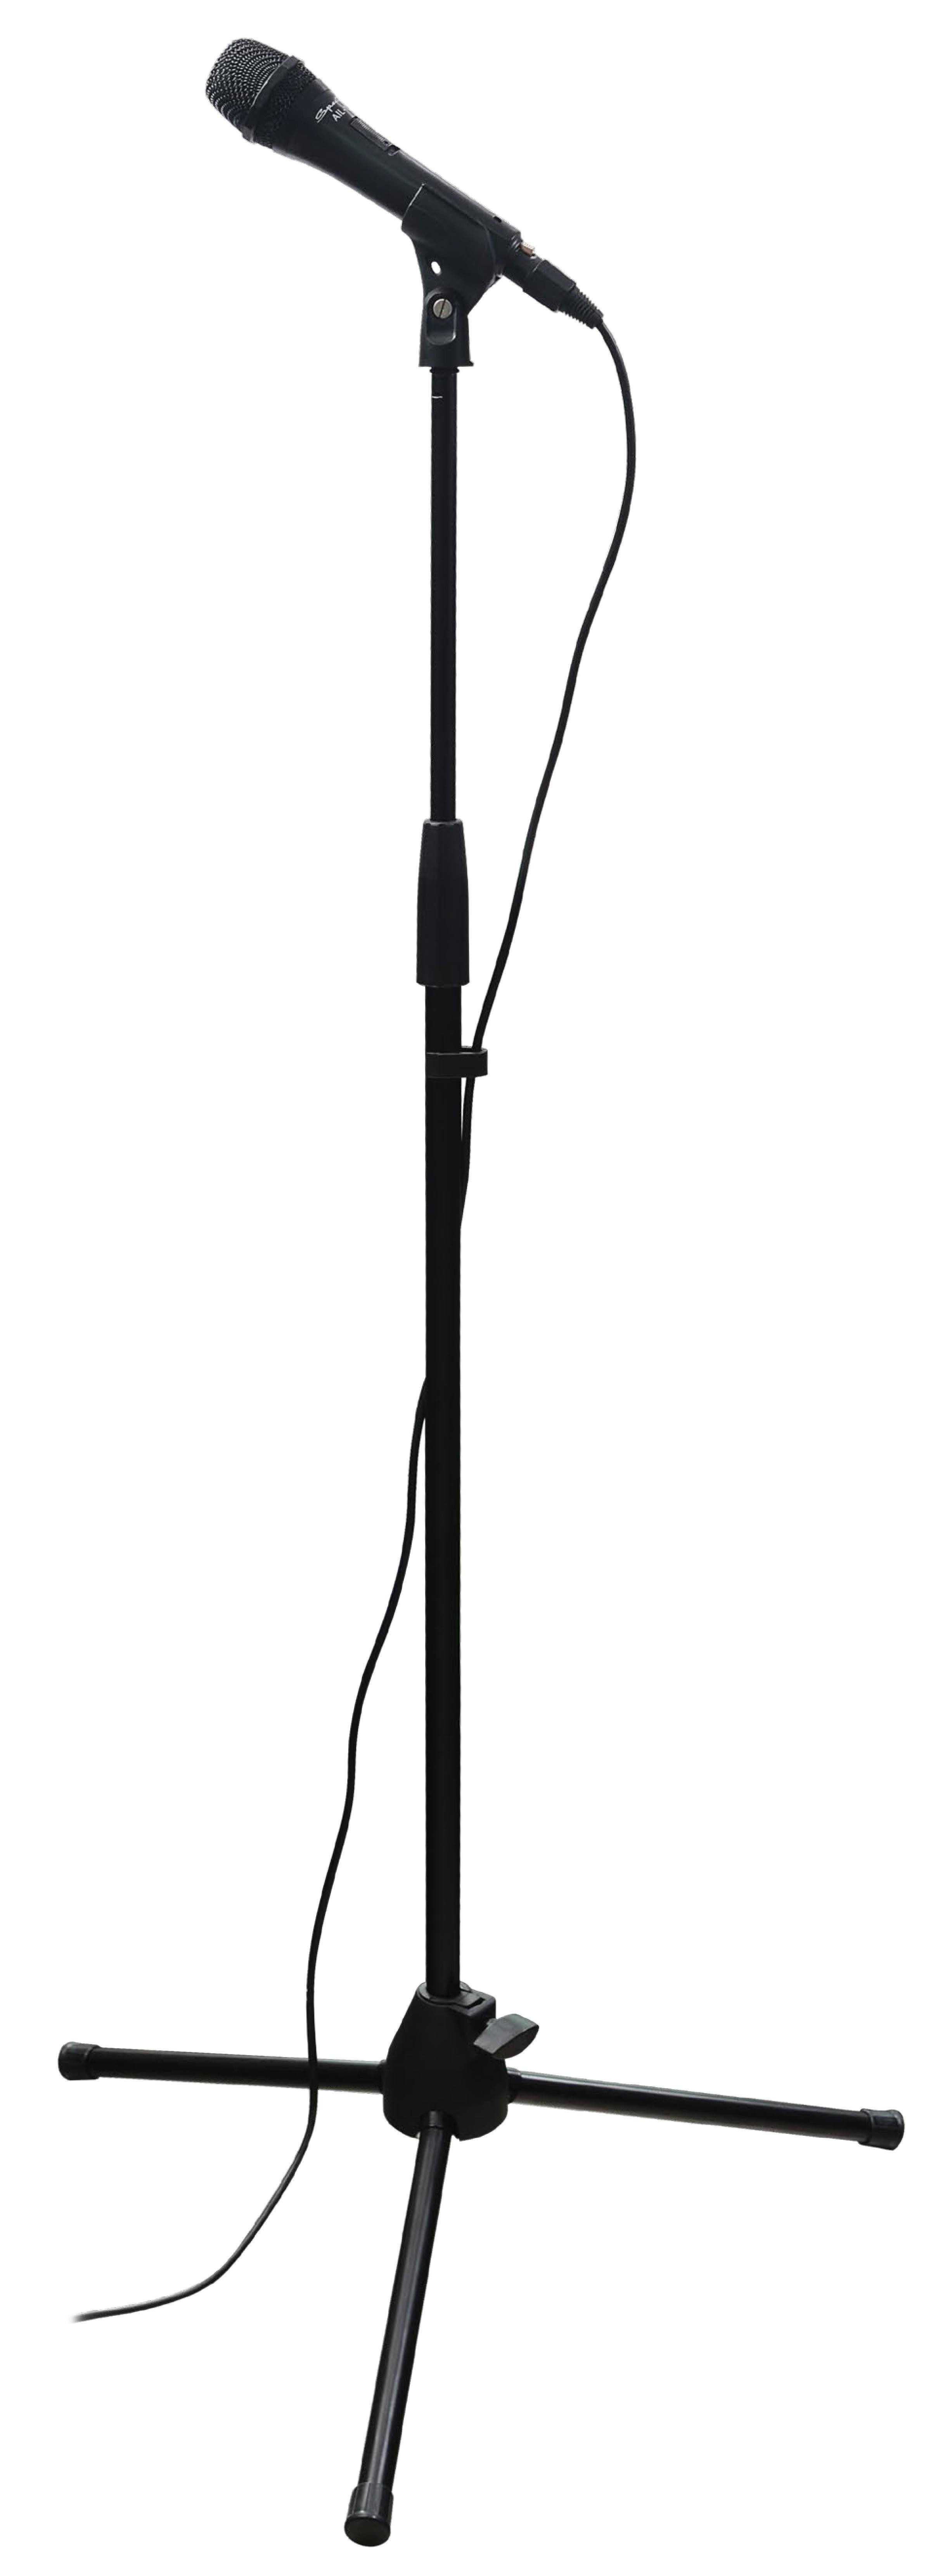 Black And White Microphone Clipart